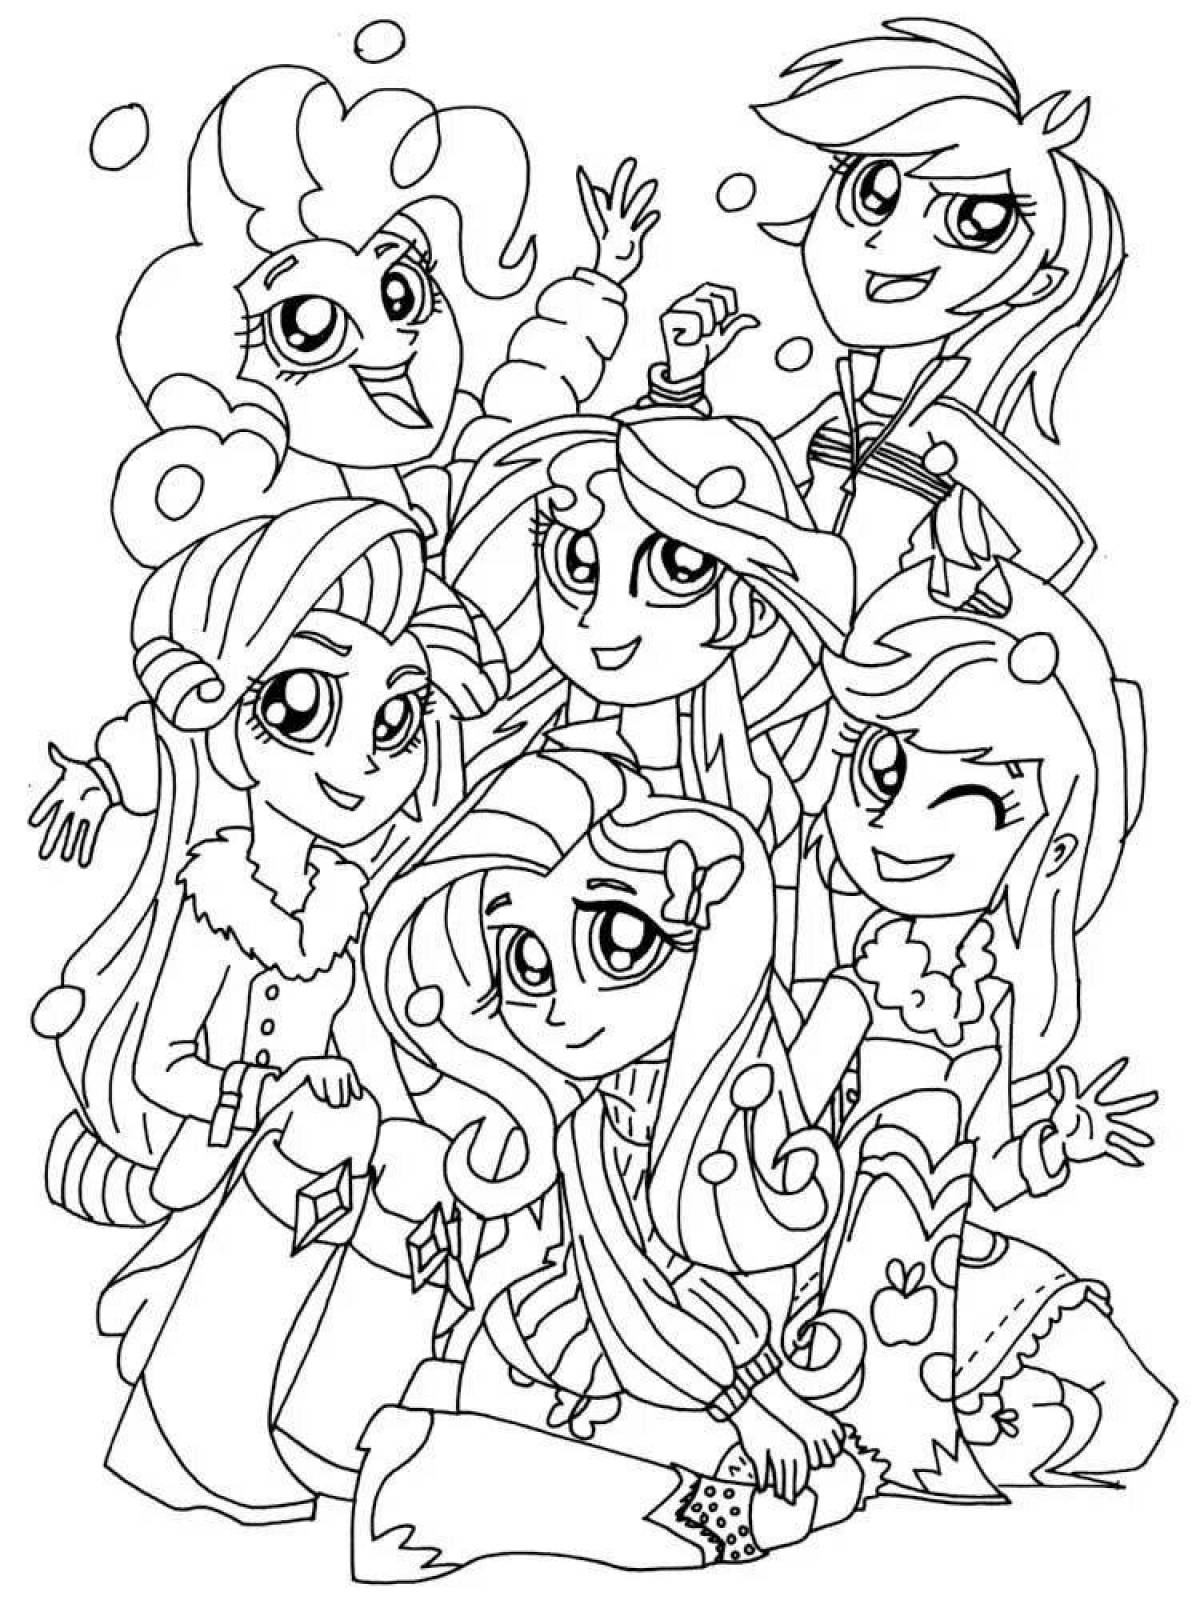 Coloring page magic pony people